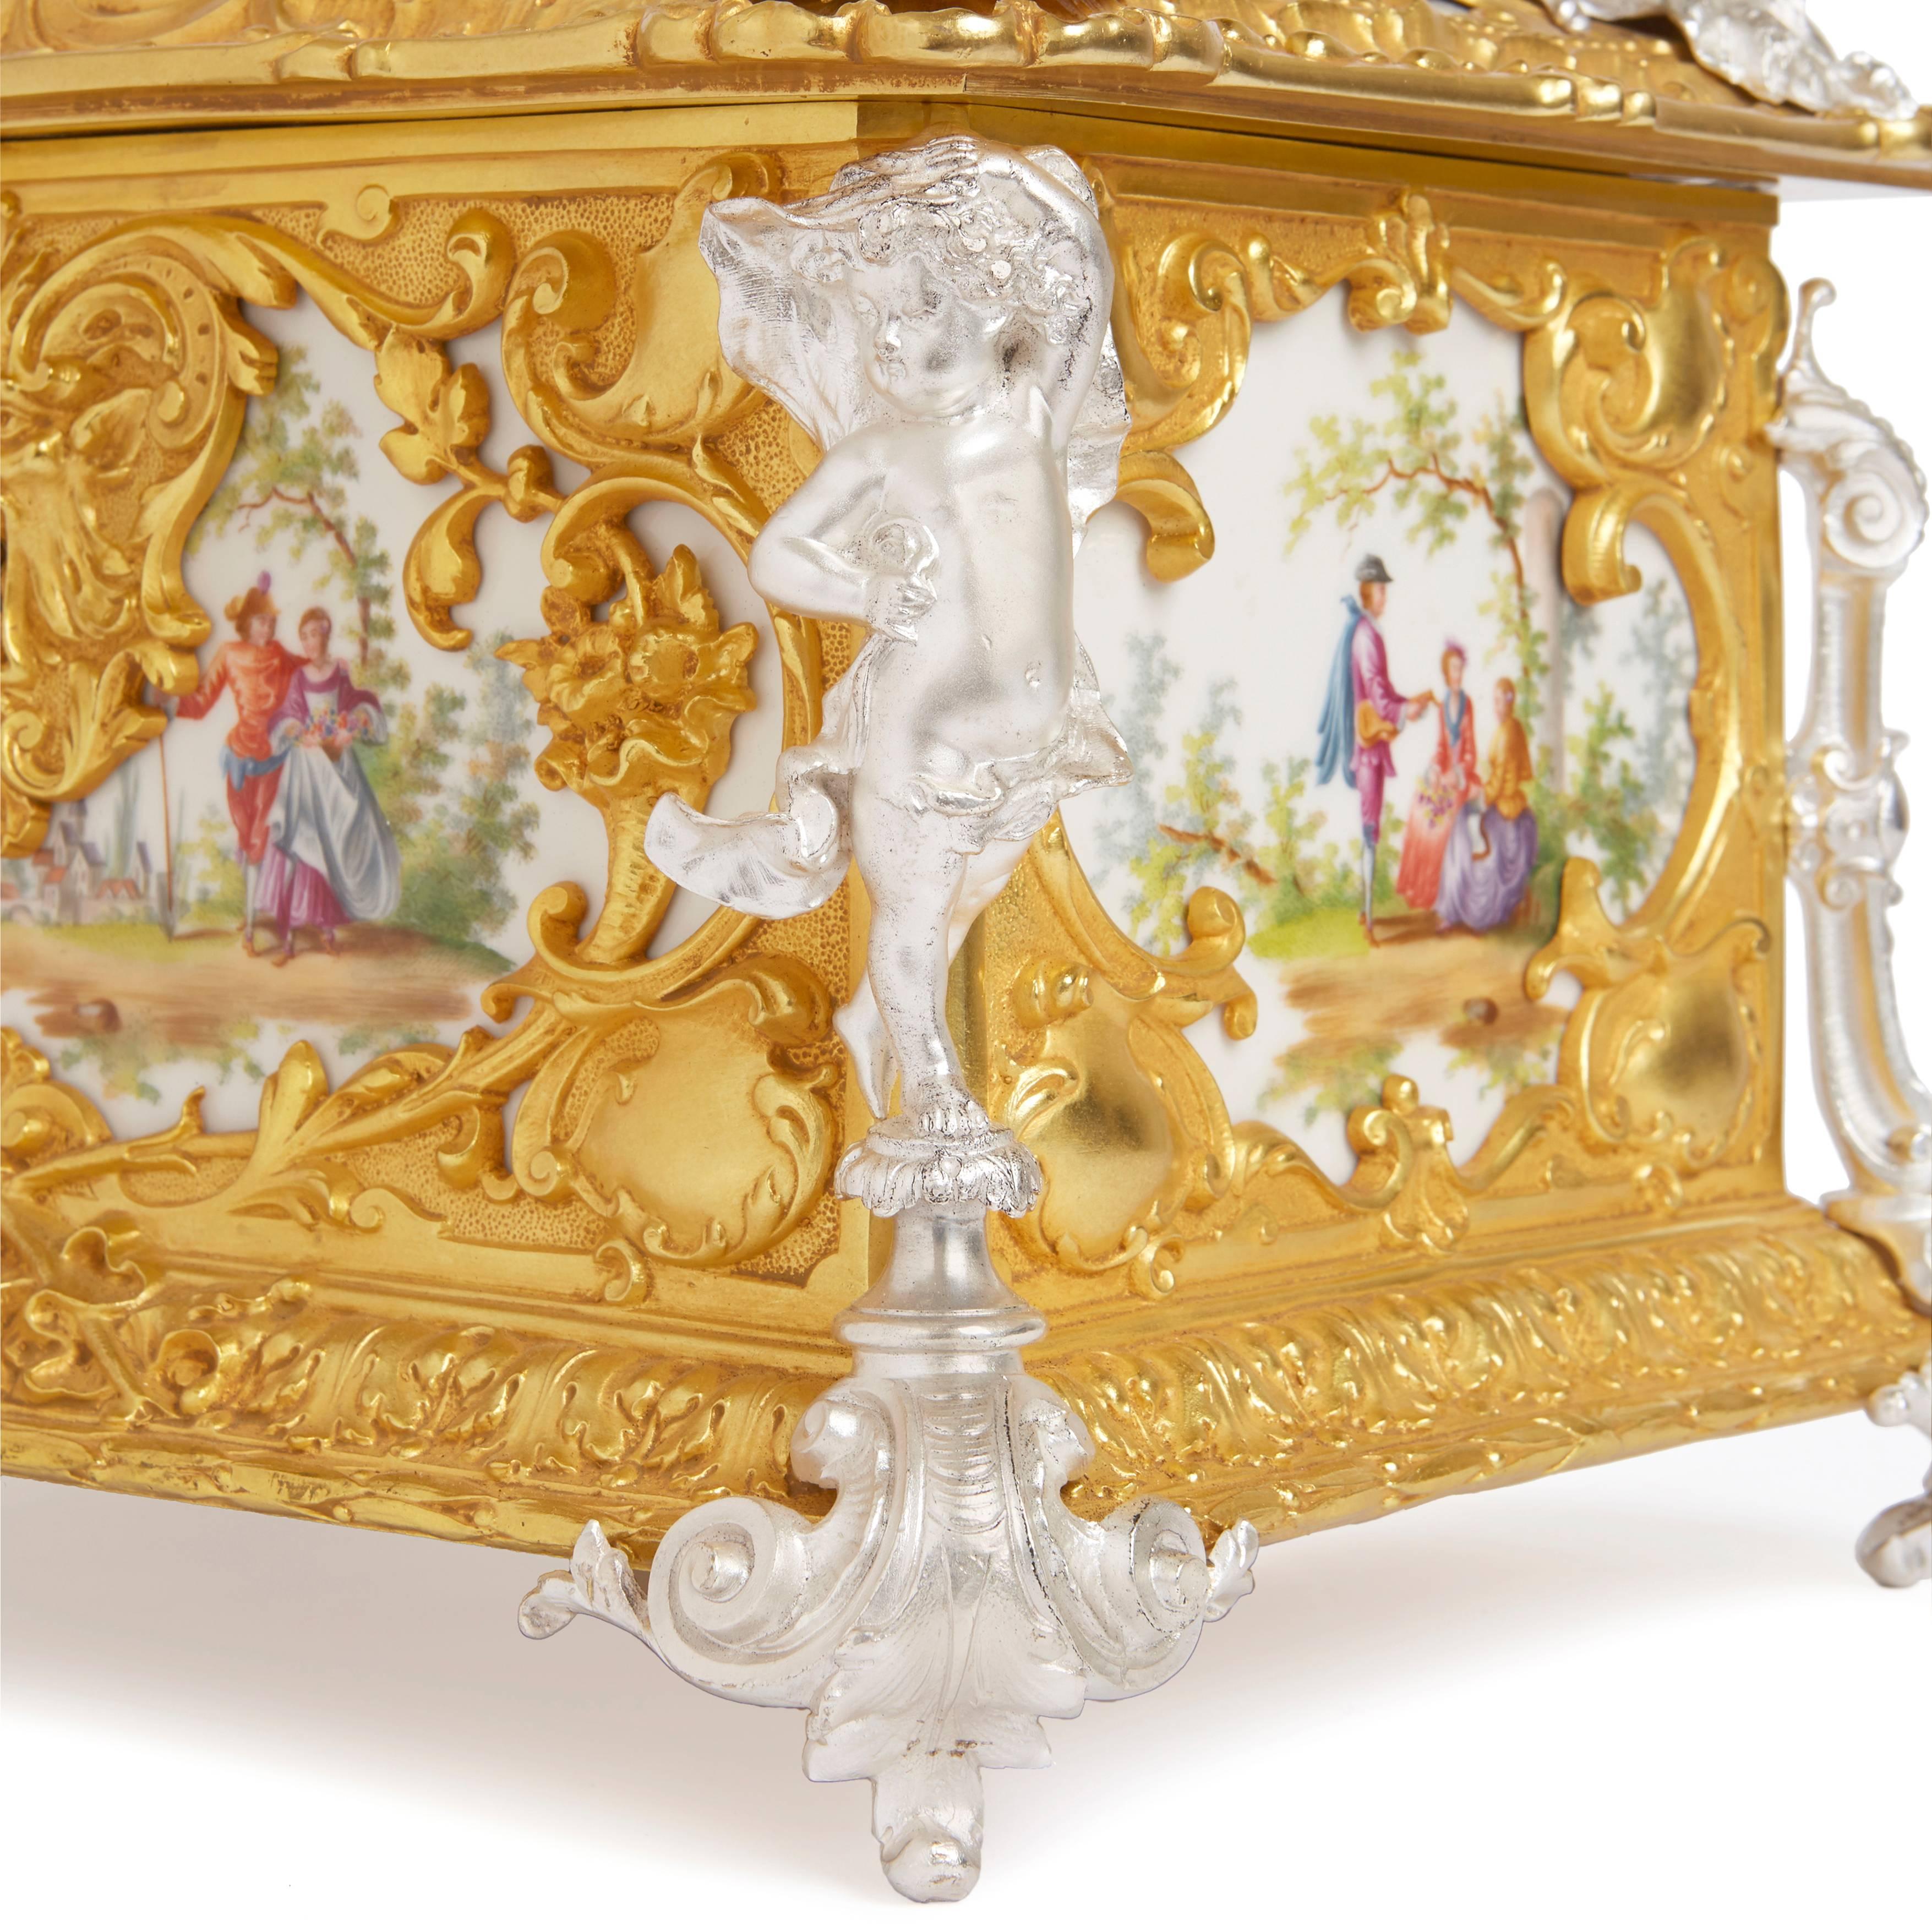 Louis XVI Style Silvered and Gilt Bronze Mounted KPM Porcelain Casket 1